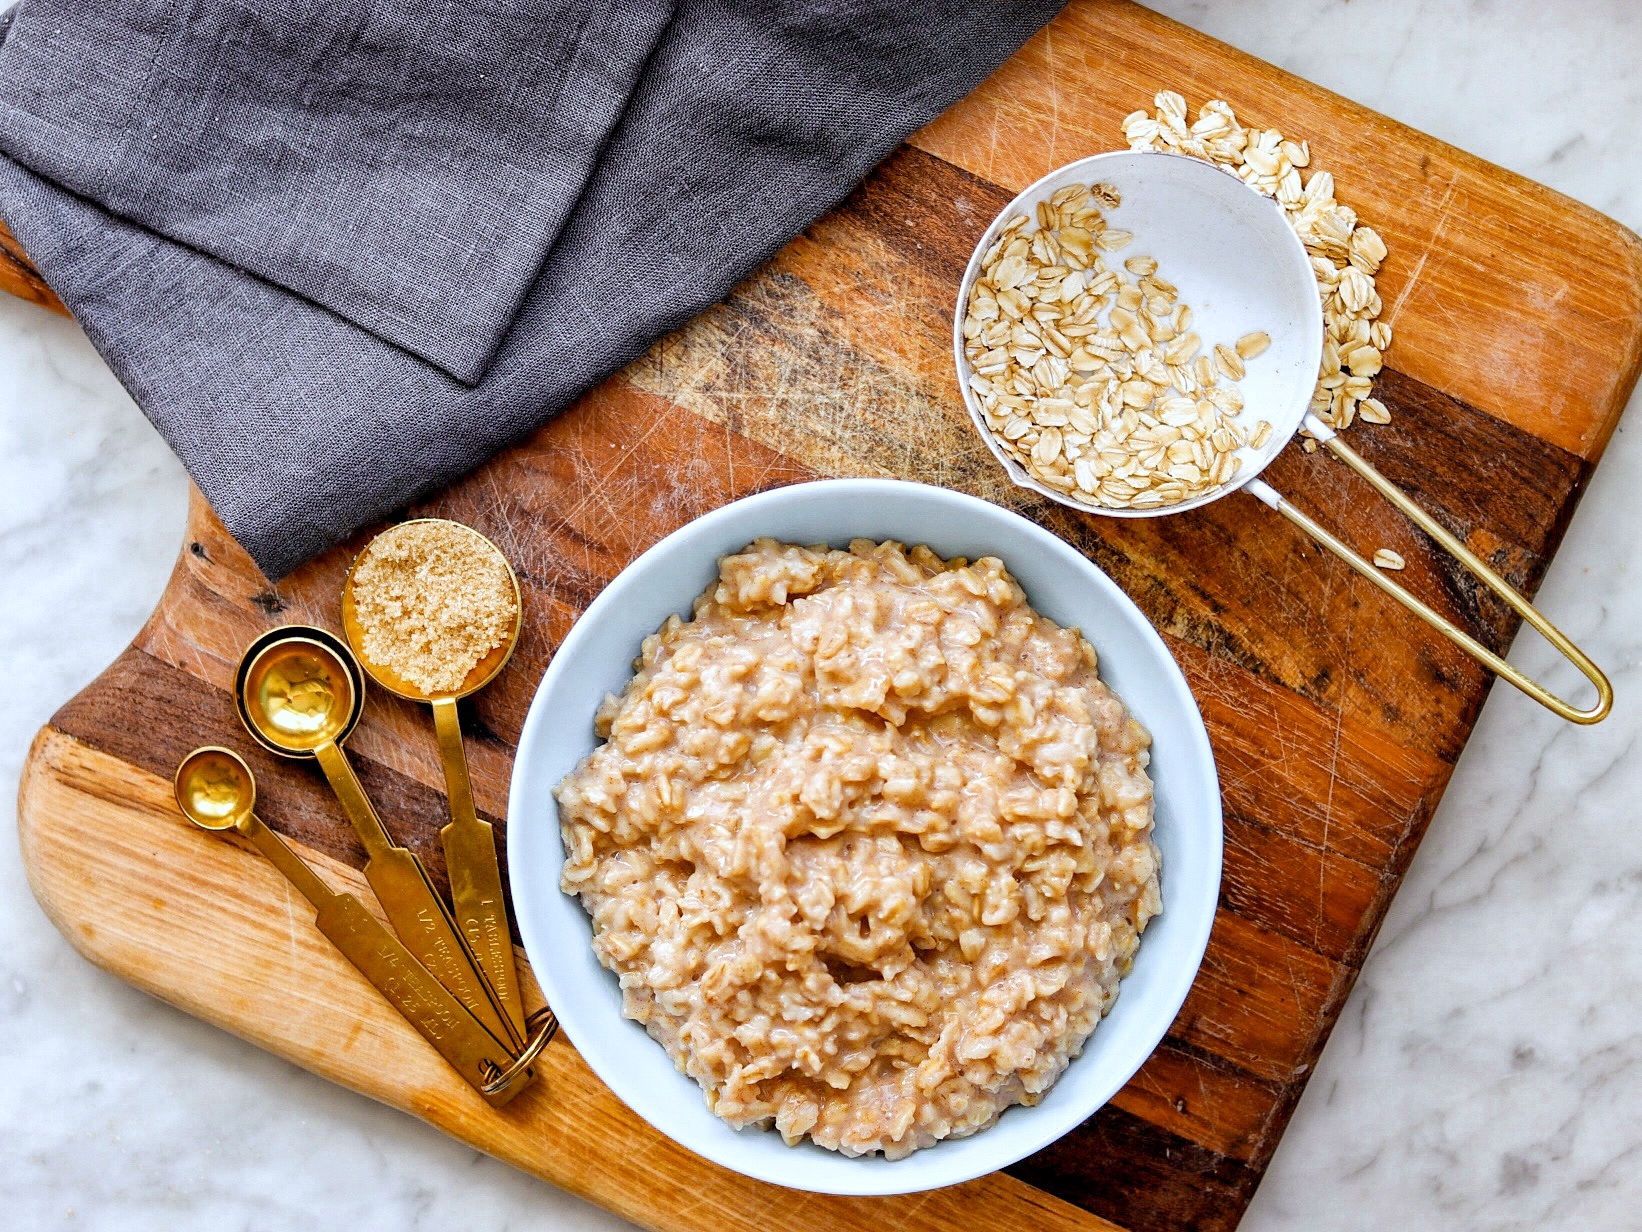 5-Ingredient Cinnamon and Brown Sugar Instant Pot pot in pot Oatmeal recipe